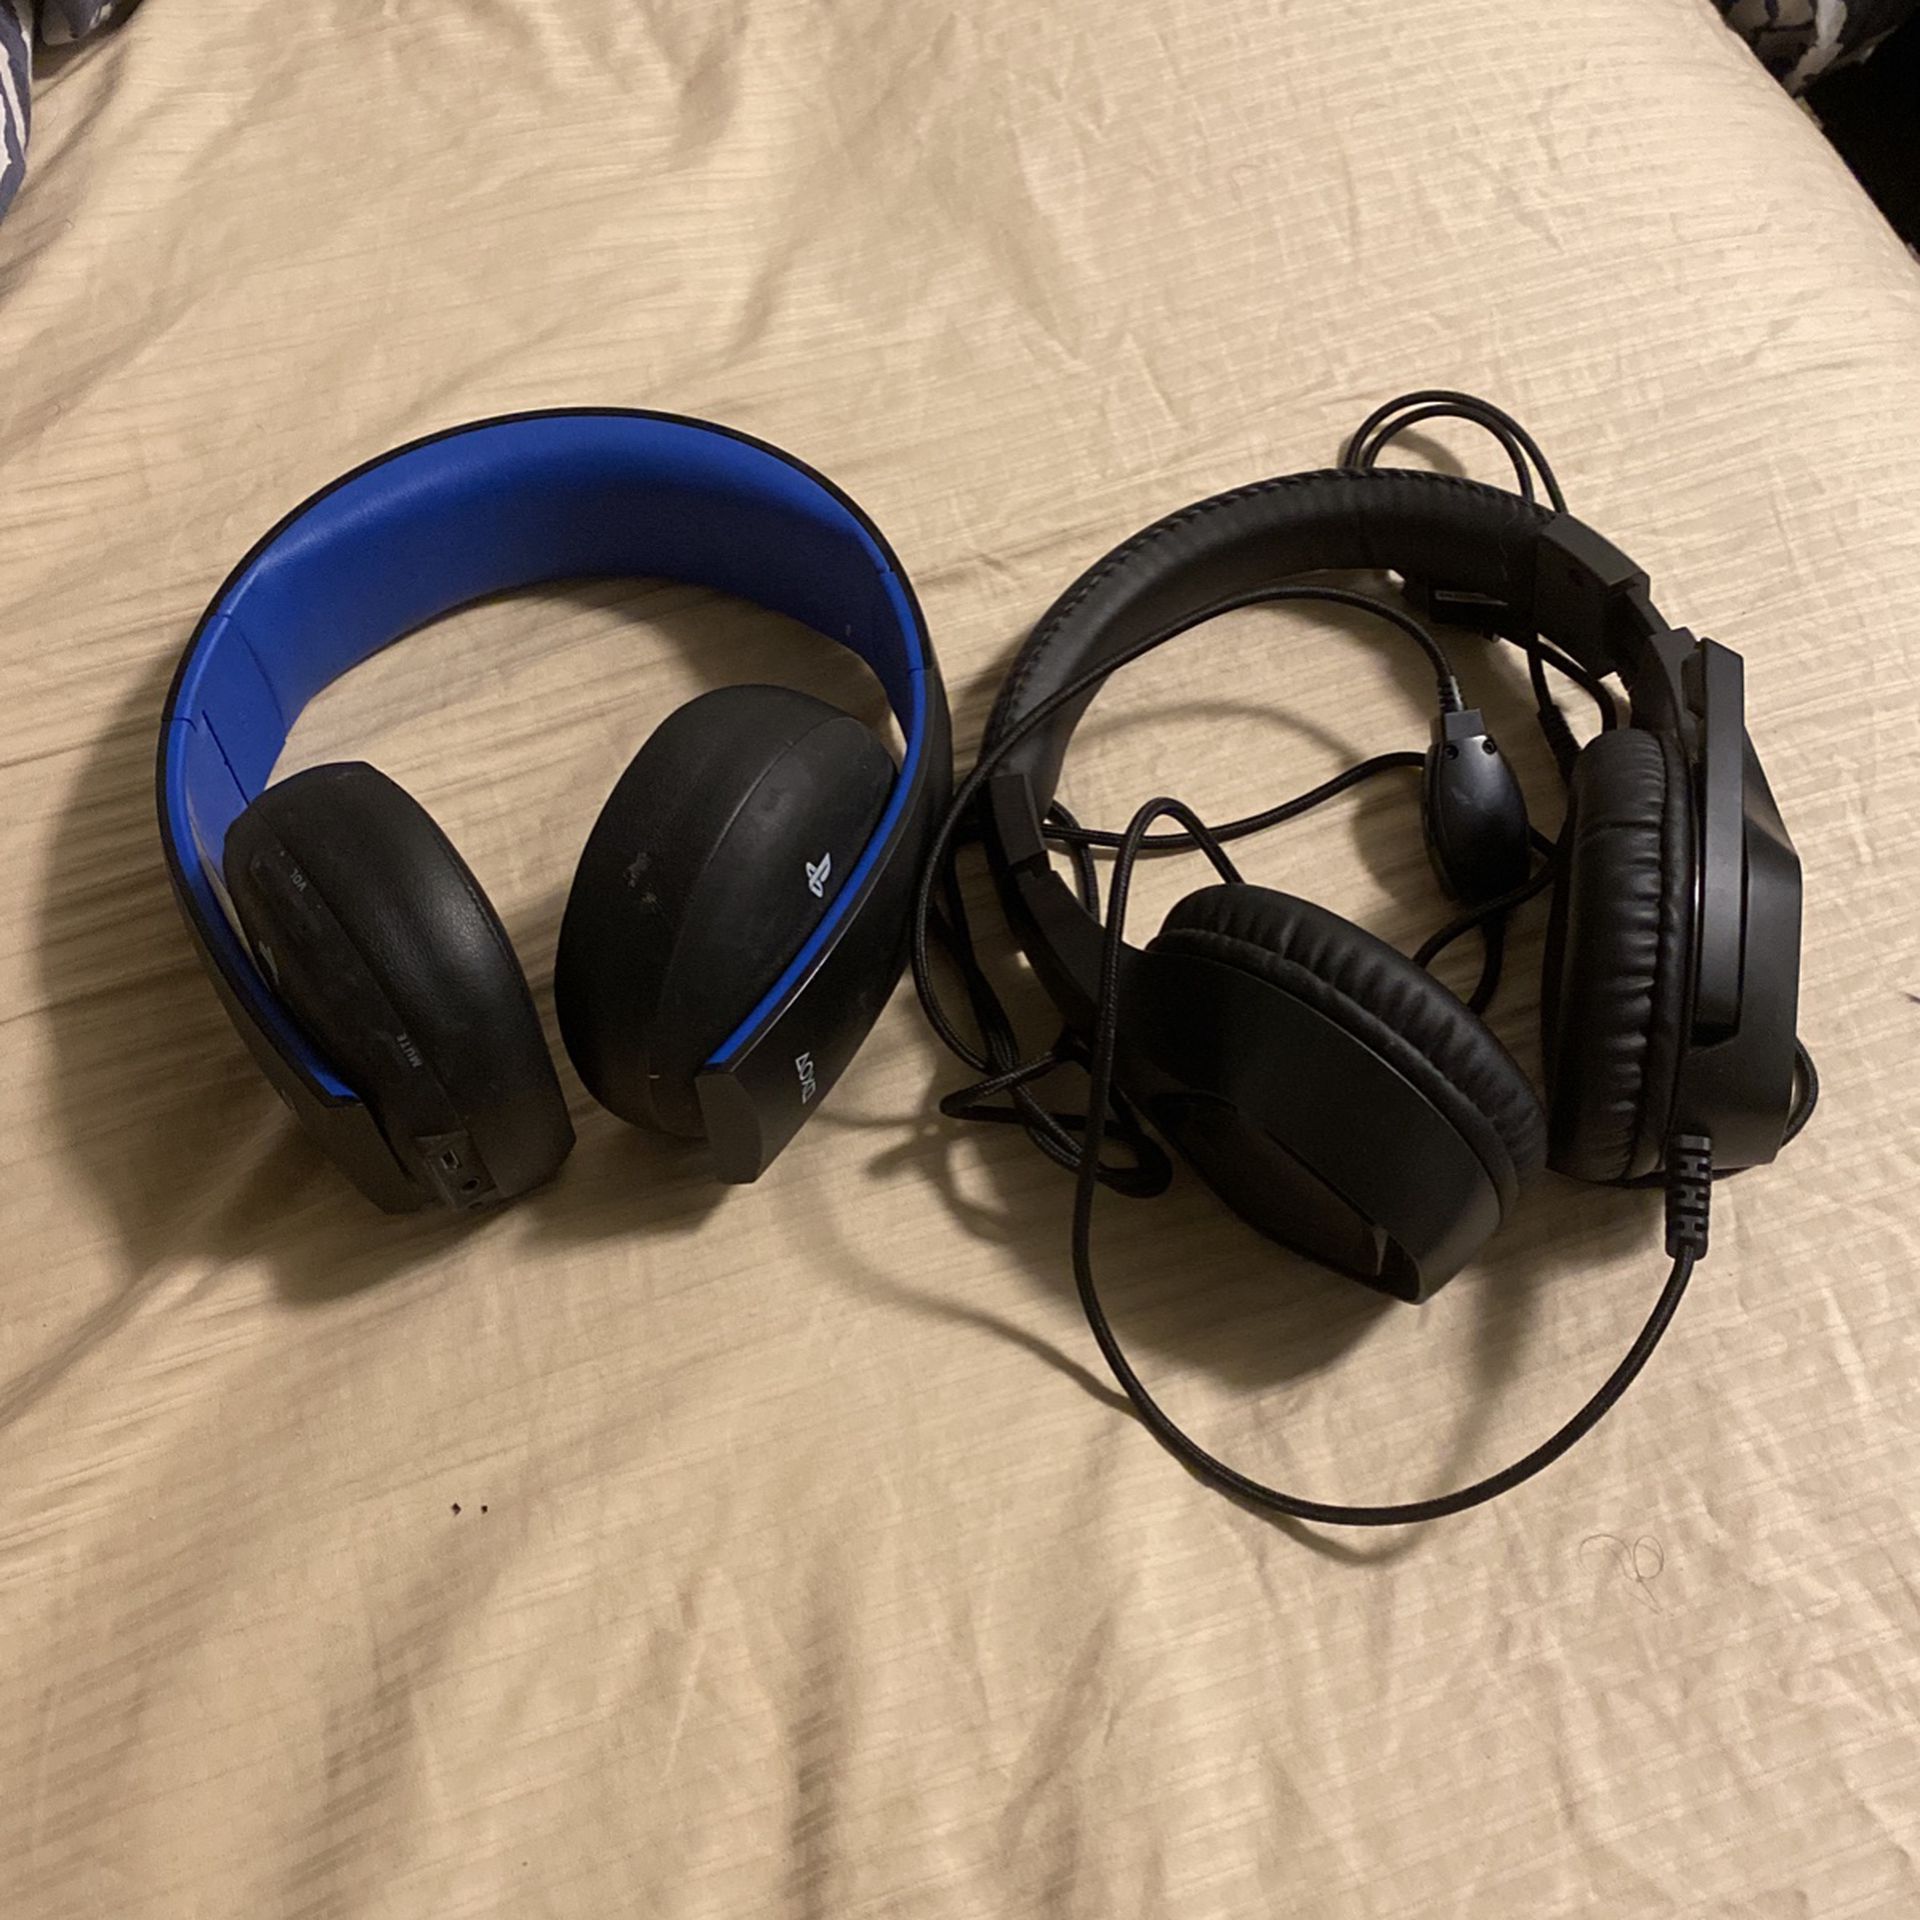 2 Headsets (wireless/wired)